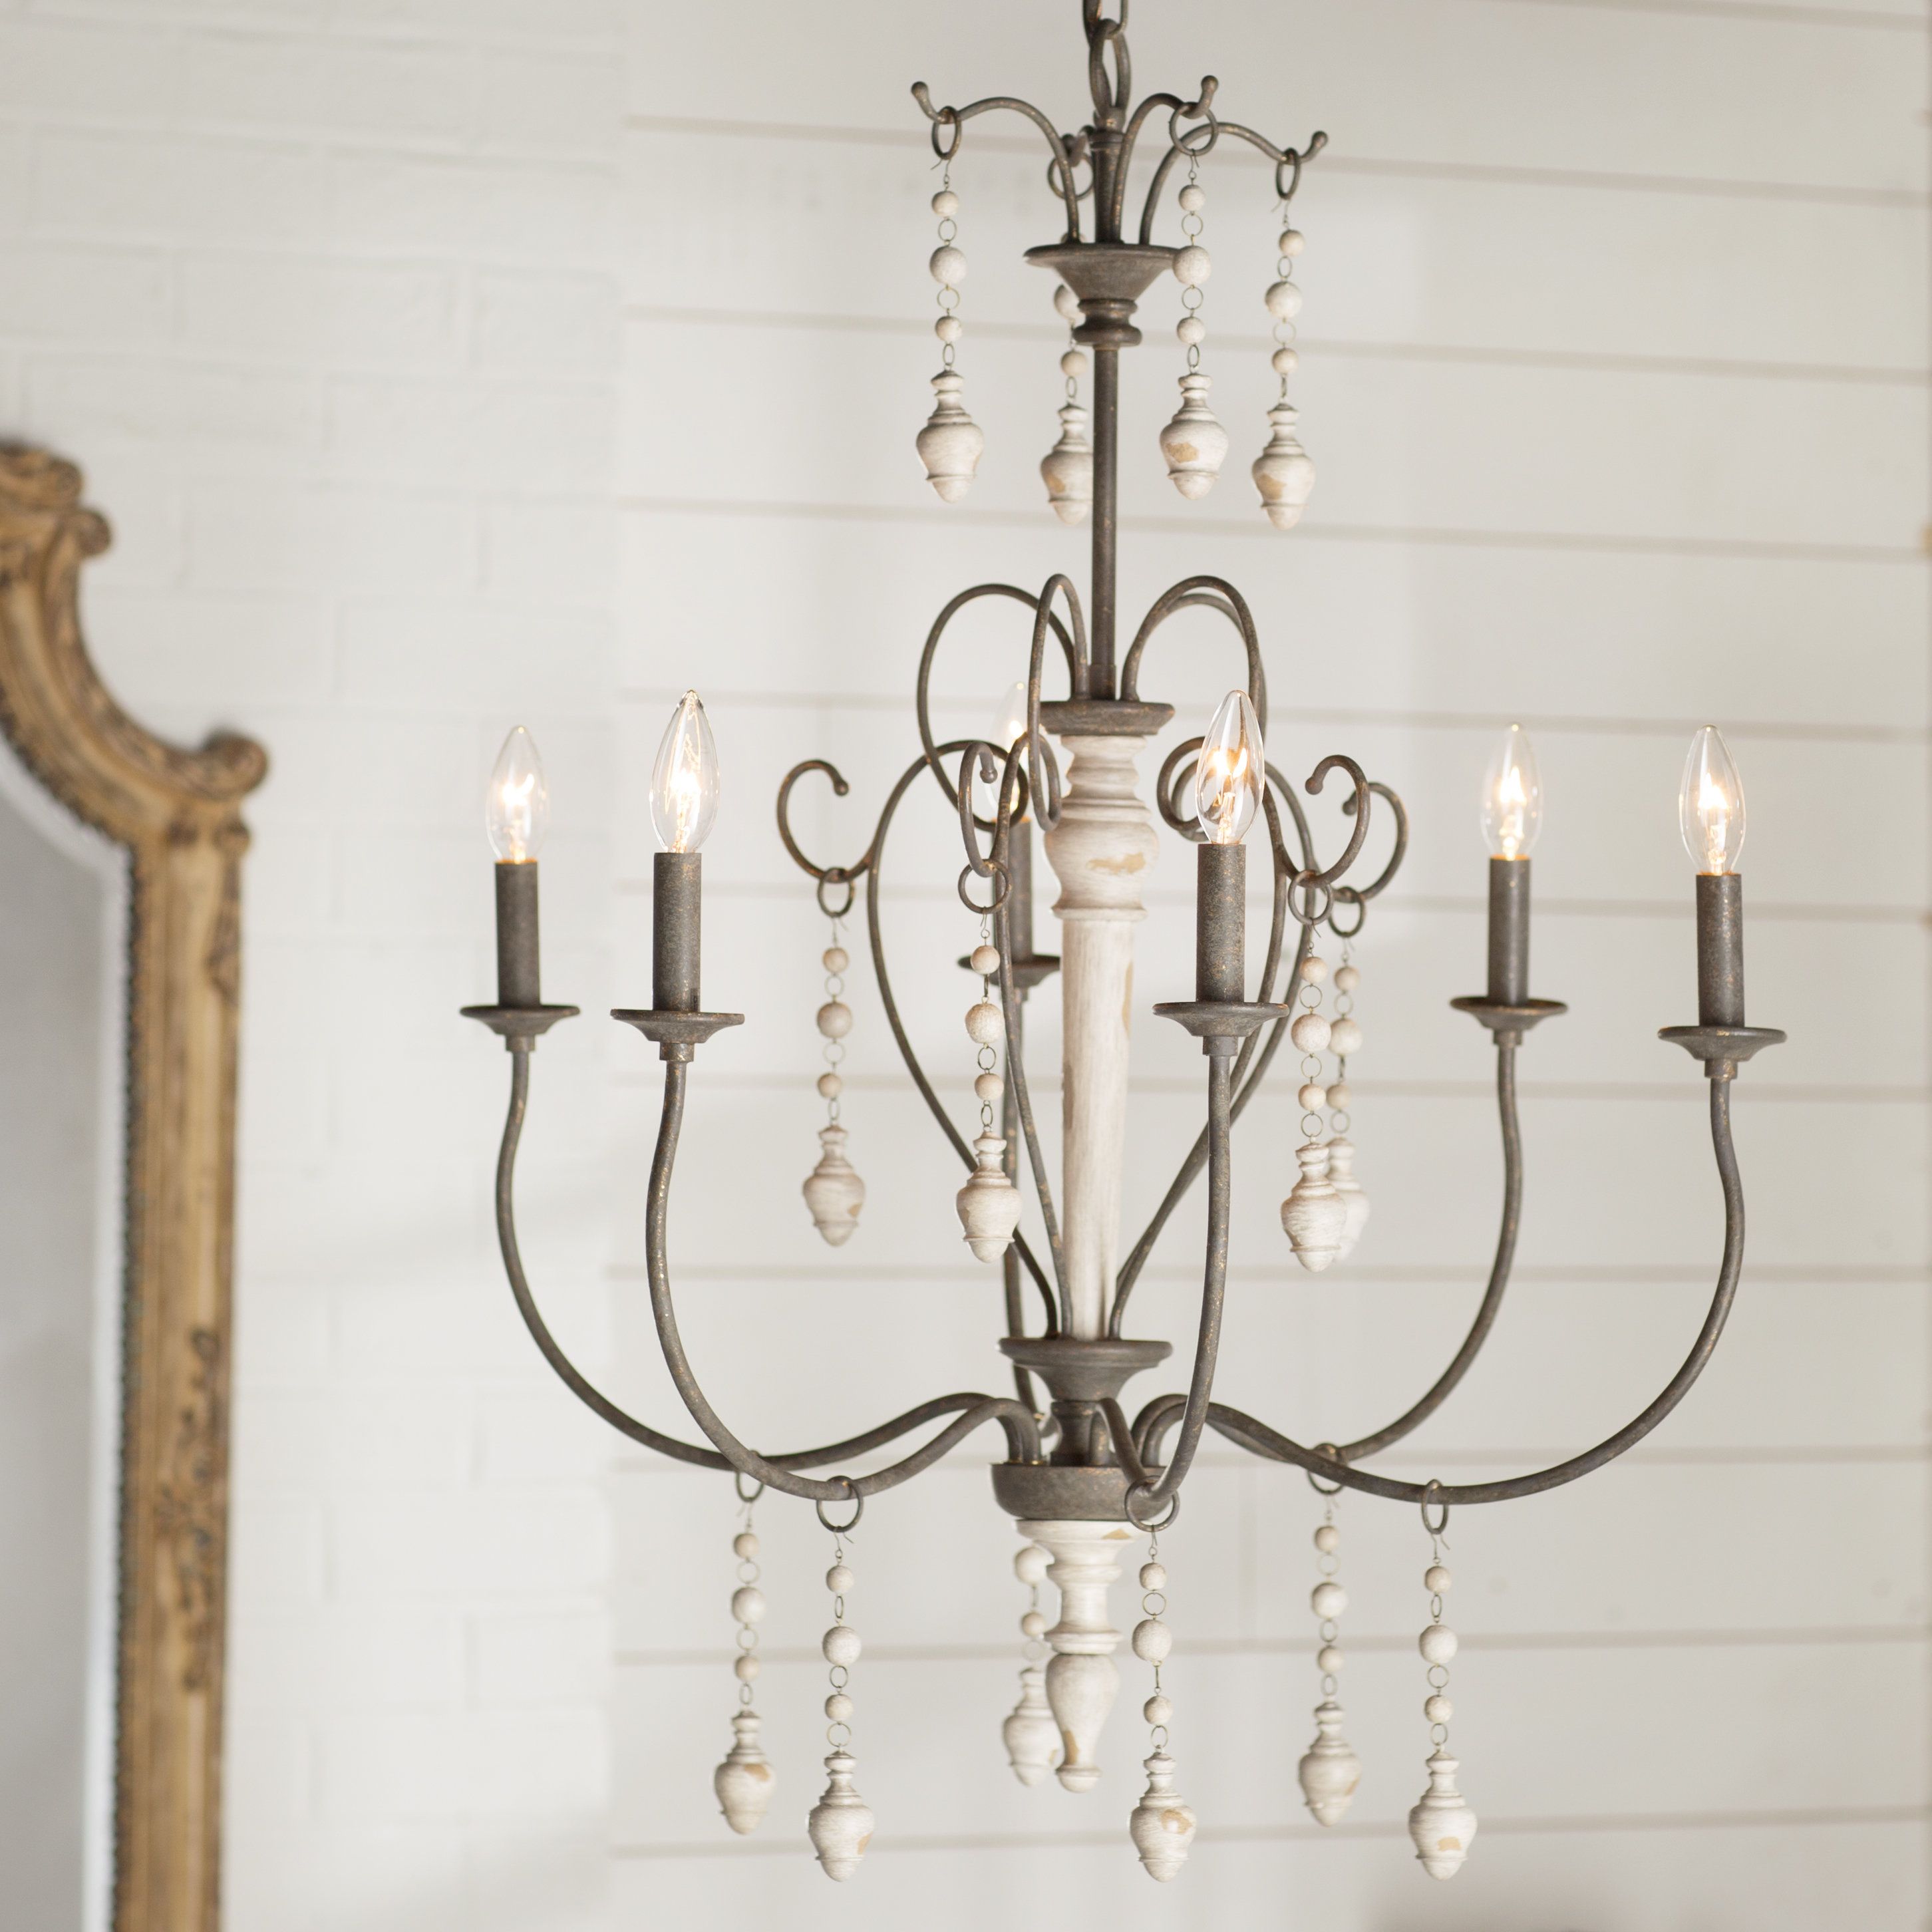 Bouchette Traditional 6 Light Candle Style Chandelier Regarding Armande Candle Style Chandeliers (View 10 of 30)